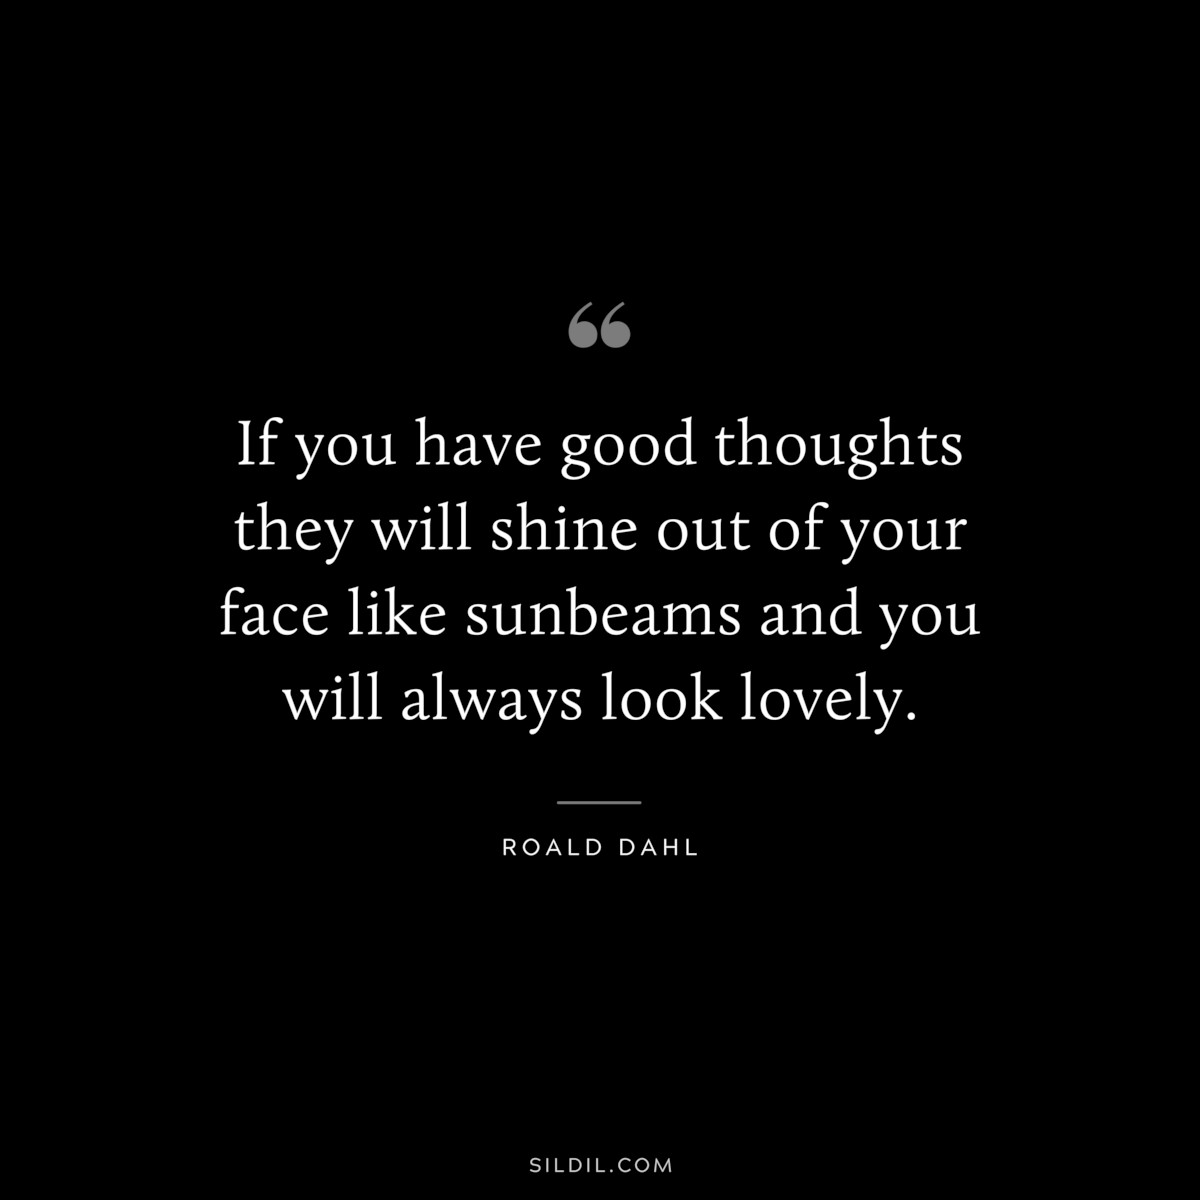 If you have good thoughts they will shine out of your face like sunbeams and you will always look lovely. ― Roald Dahl